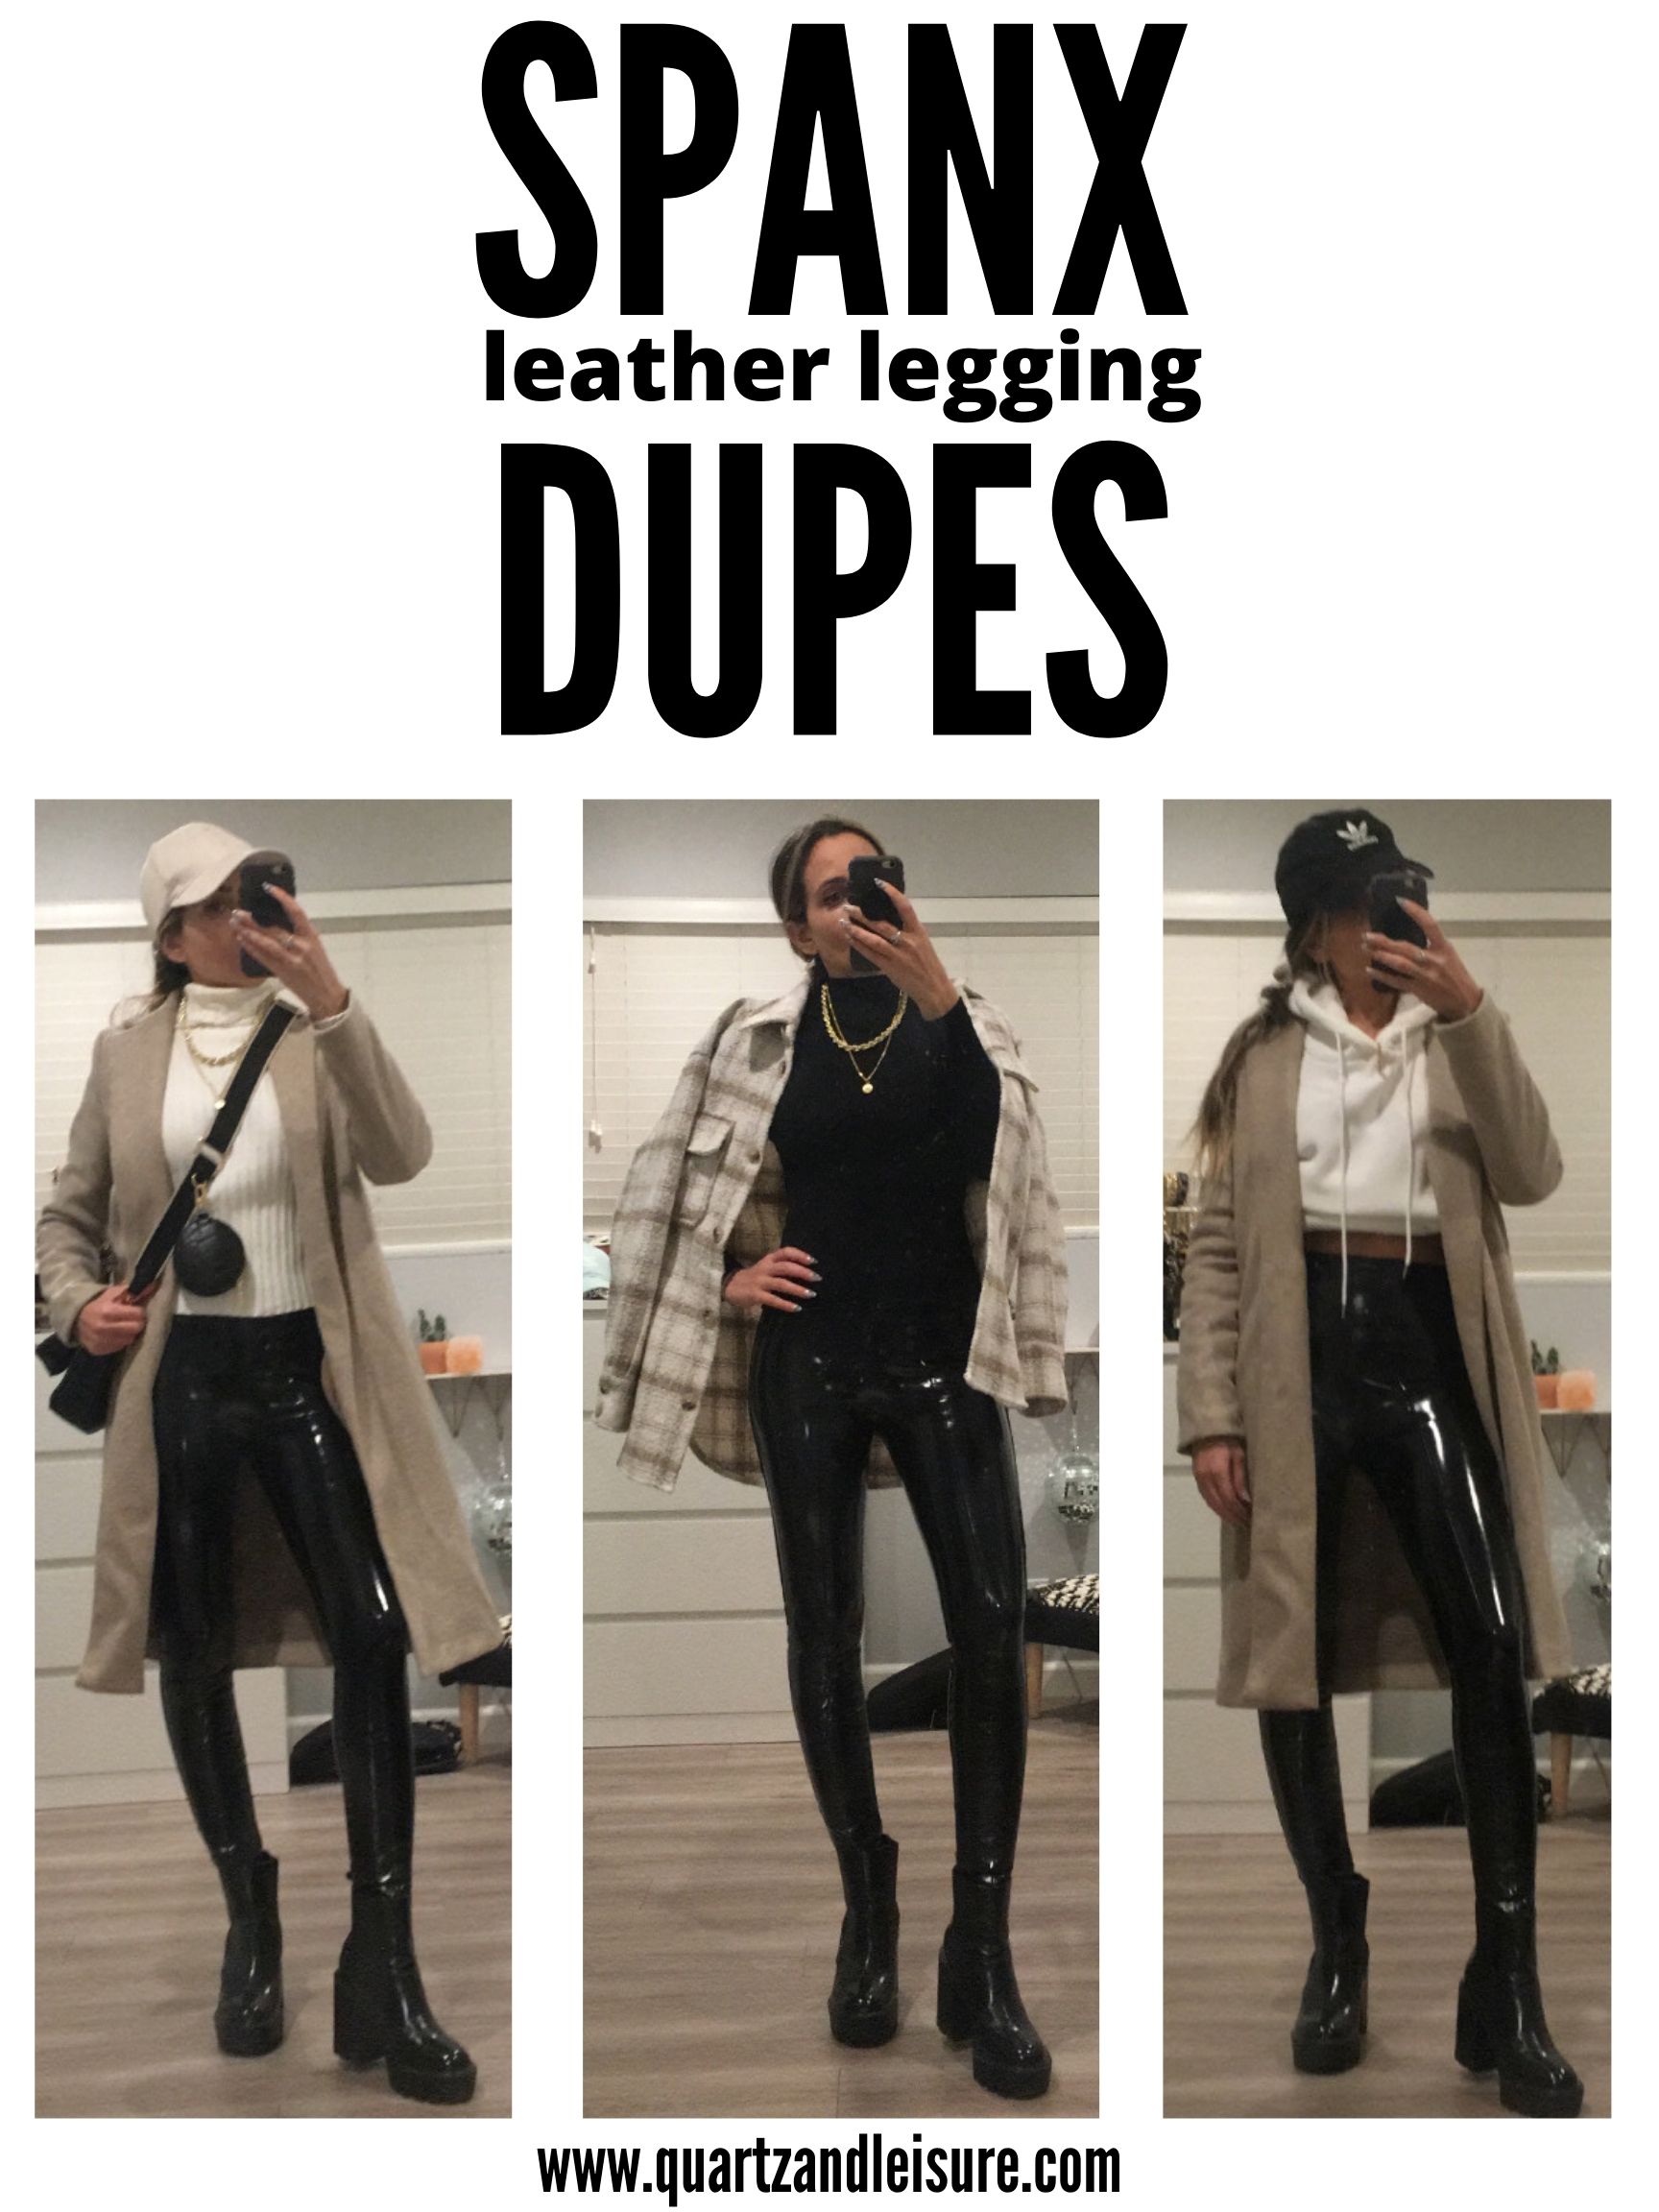 Spanx leather leggings dupe